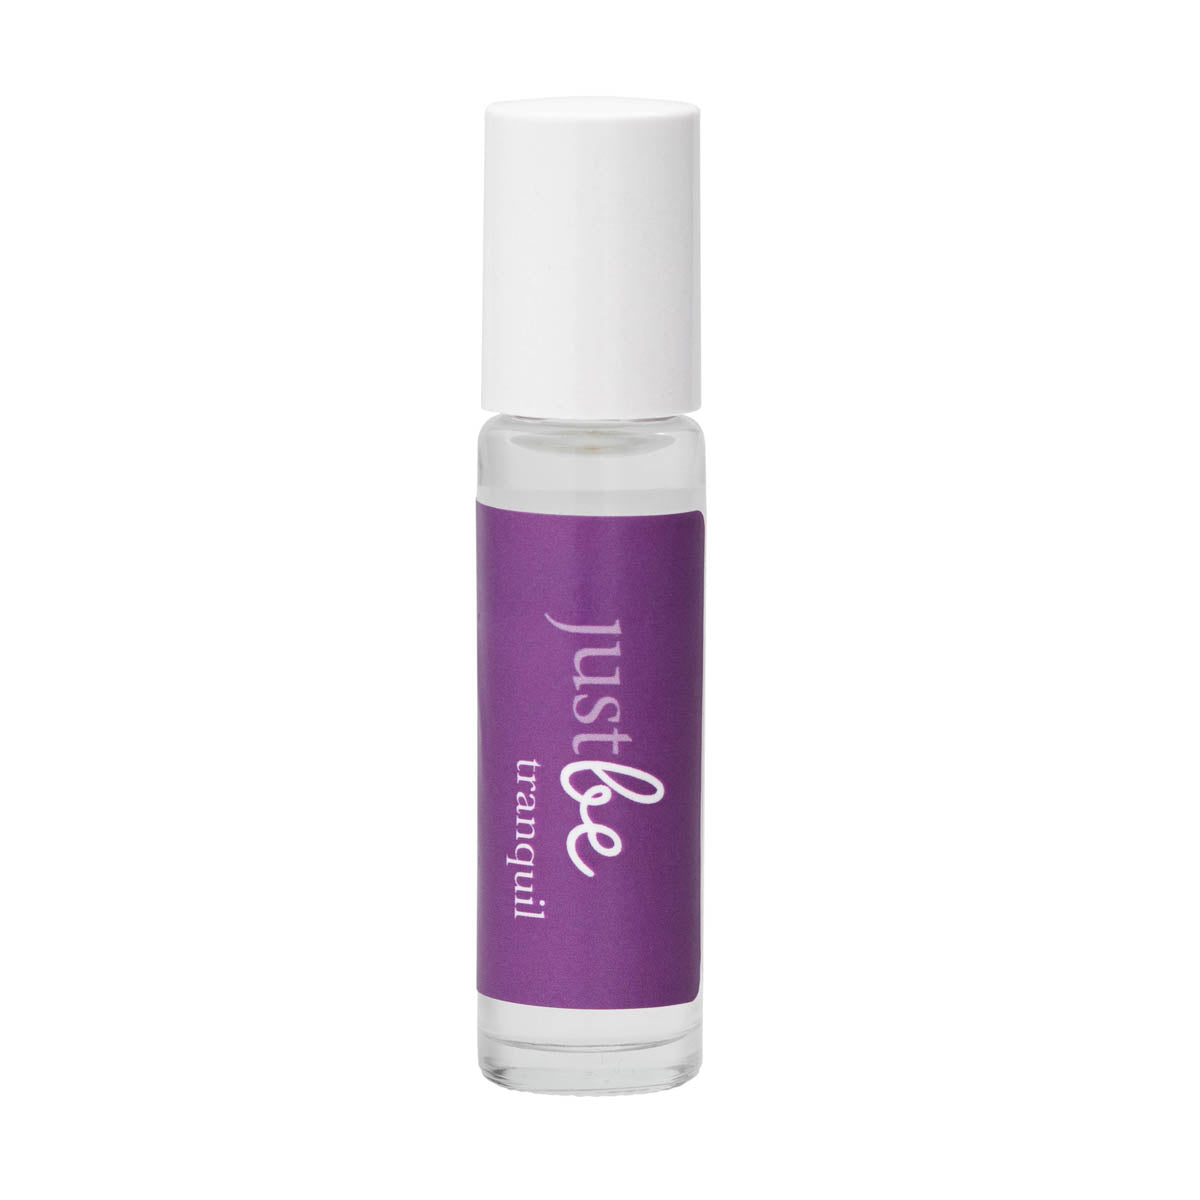 Tranquil Aromatherapy Rollerball